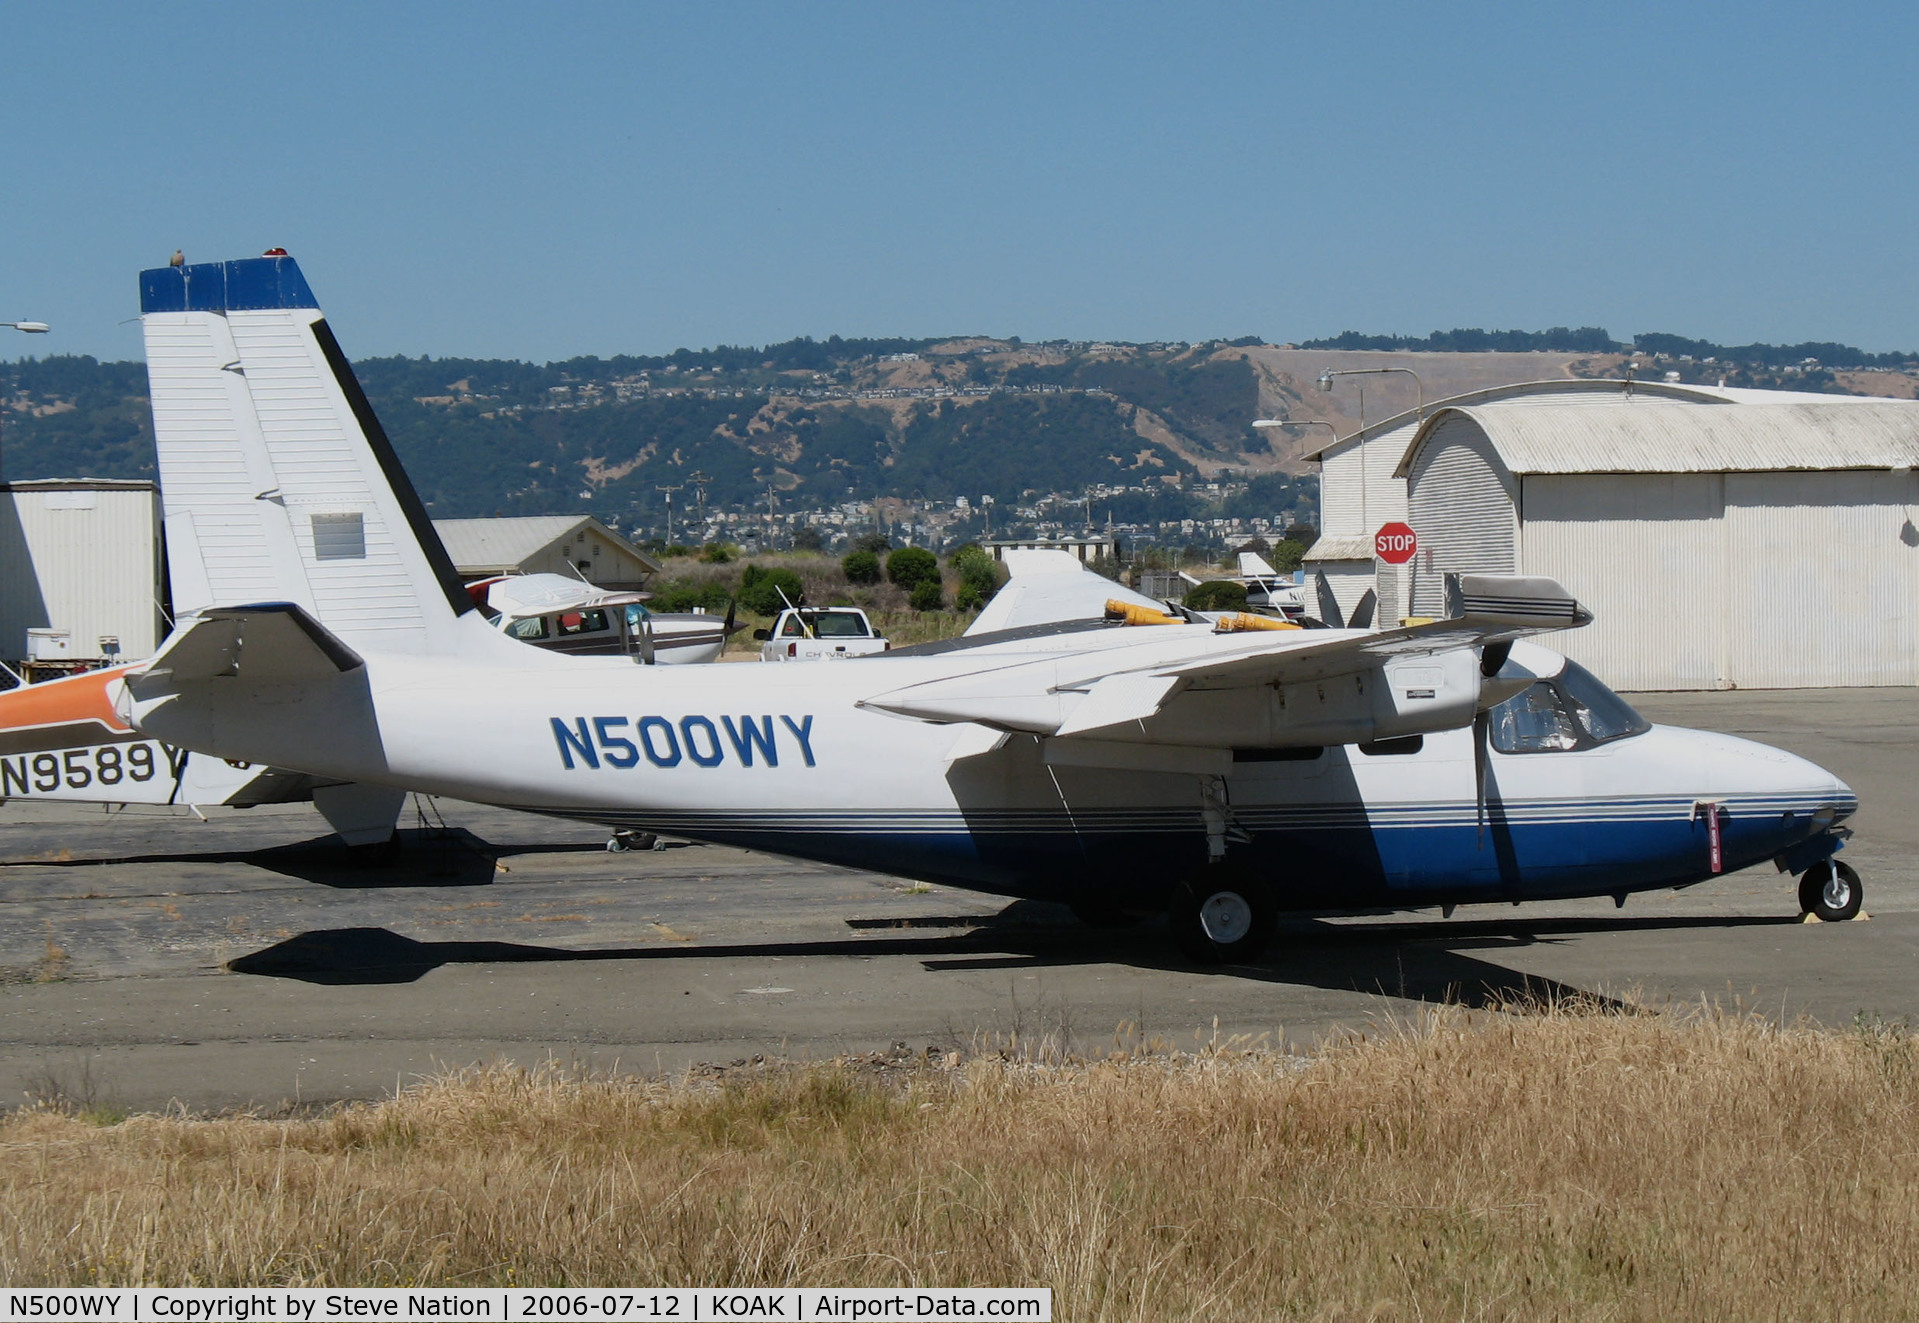 N500WY, 1963 Aero Commander 500B Commander C/N 500B-1297-112, Locally-based Aero Commander 500S on North Ramp @ Oakland international Airport, CA (may be false registration as this registration is/was assigned to a PC-12)